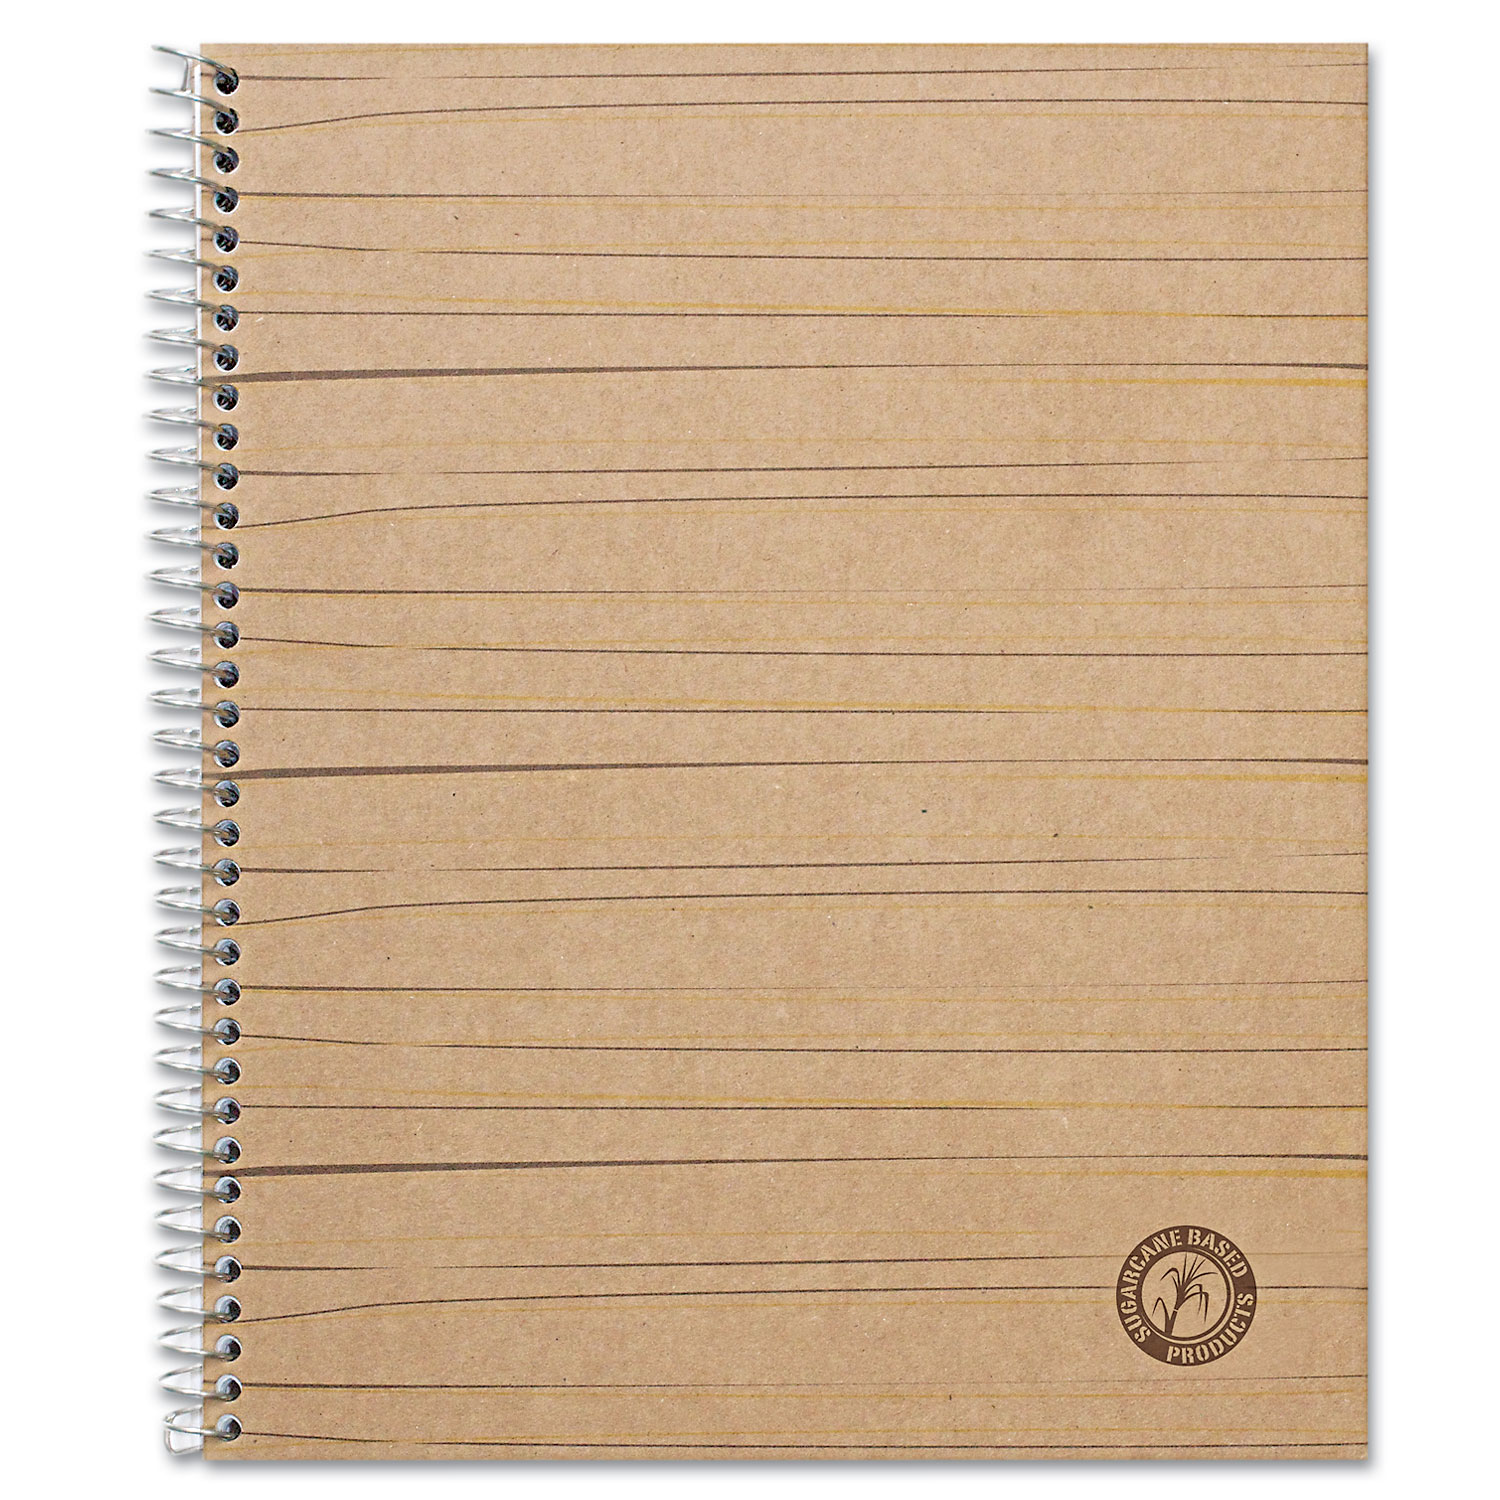  Universal UNV66208 Deluxe Sugarcane Based Notebooks, 1 Subject, Medium/College Rule, Brown Cover, 11 x 8.5, 100 Sheets (UNV66208) 